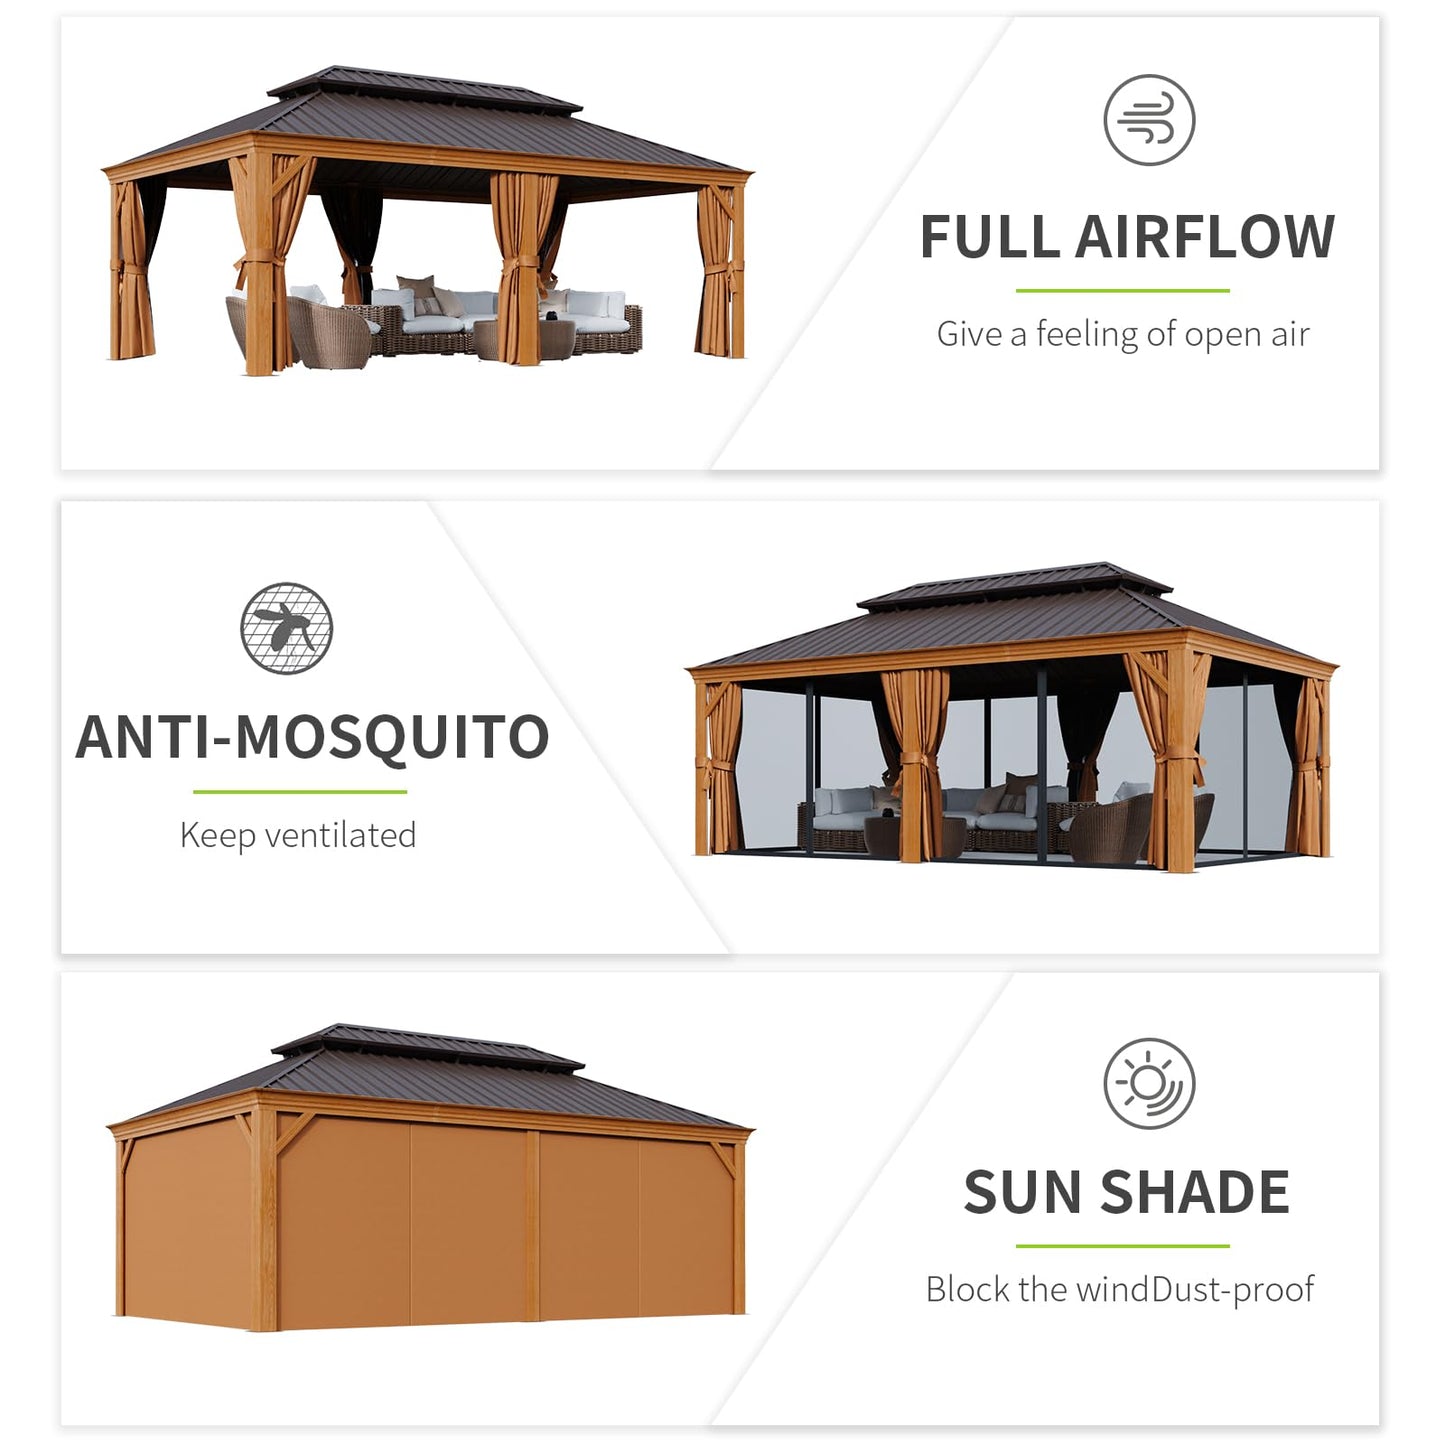 Aoxun 12' x 20' Hardtop Gazebo, Wooden Finish Coated Aluminum Frame Canopy, Galvanized Steel Double Top, Outdoor Permanent Metal Pavilion with